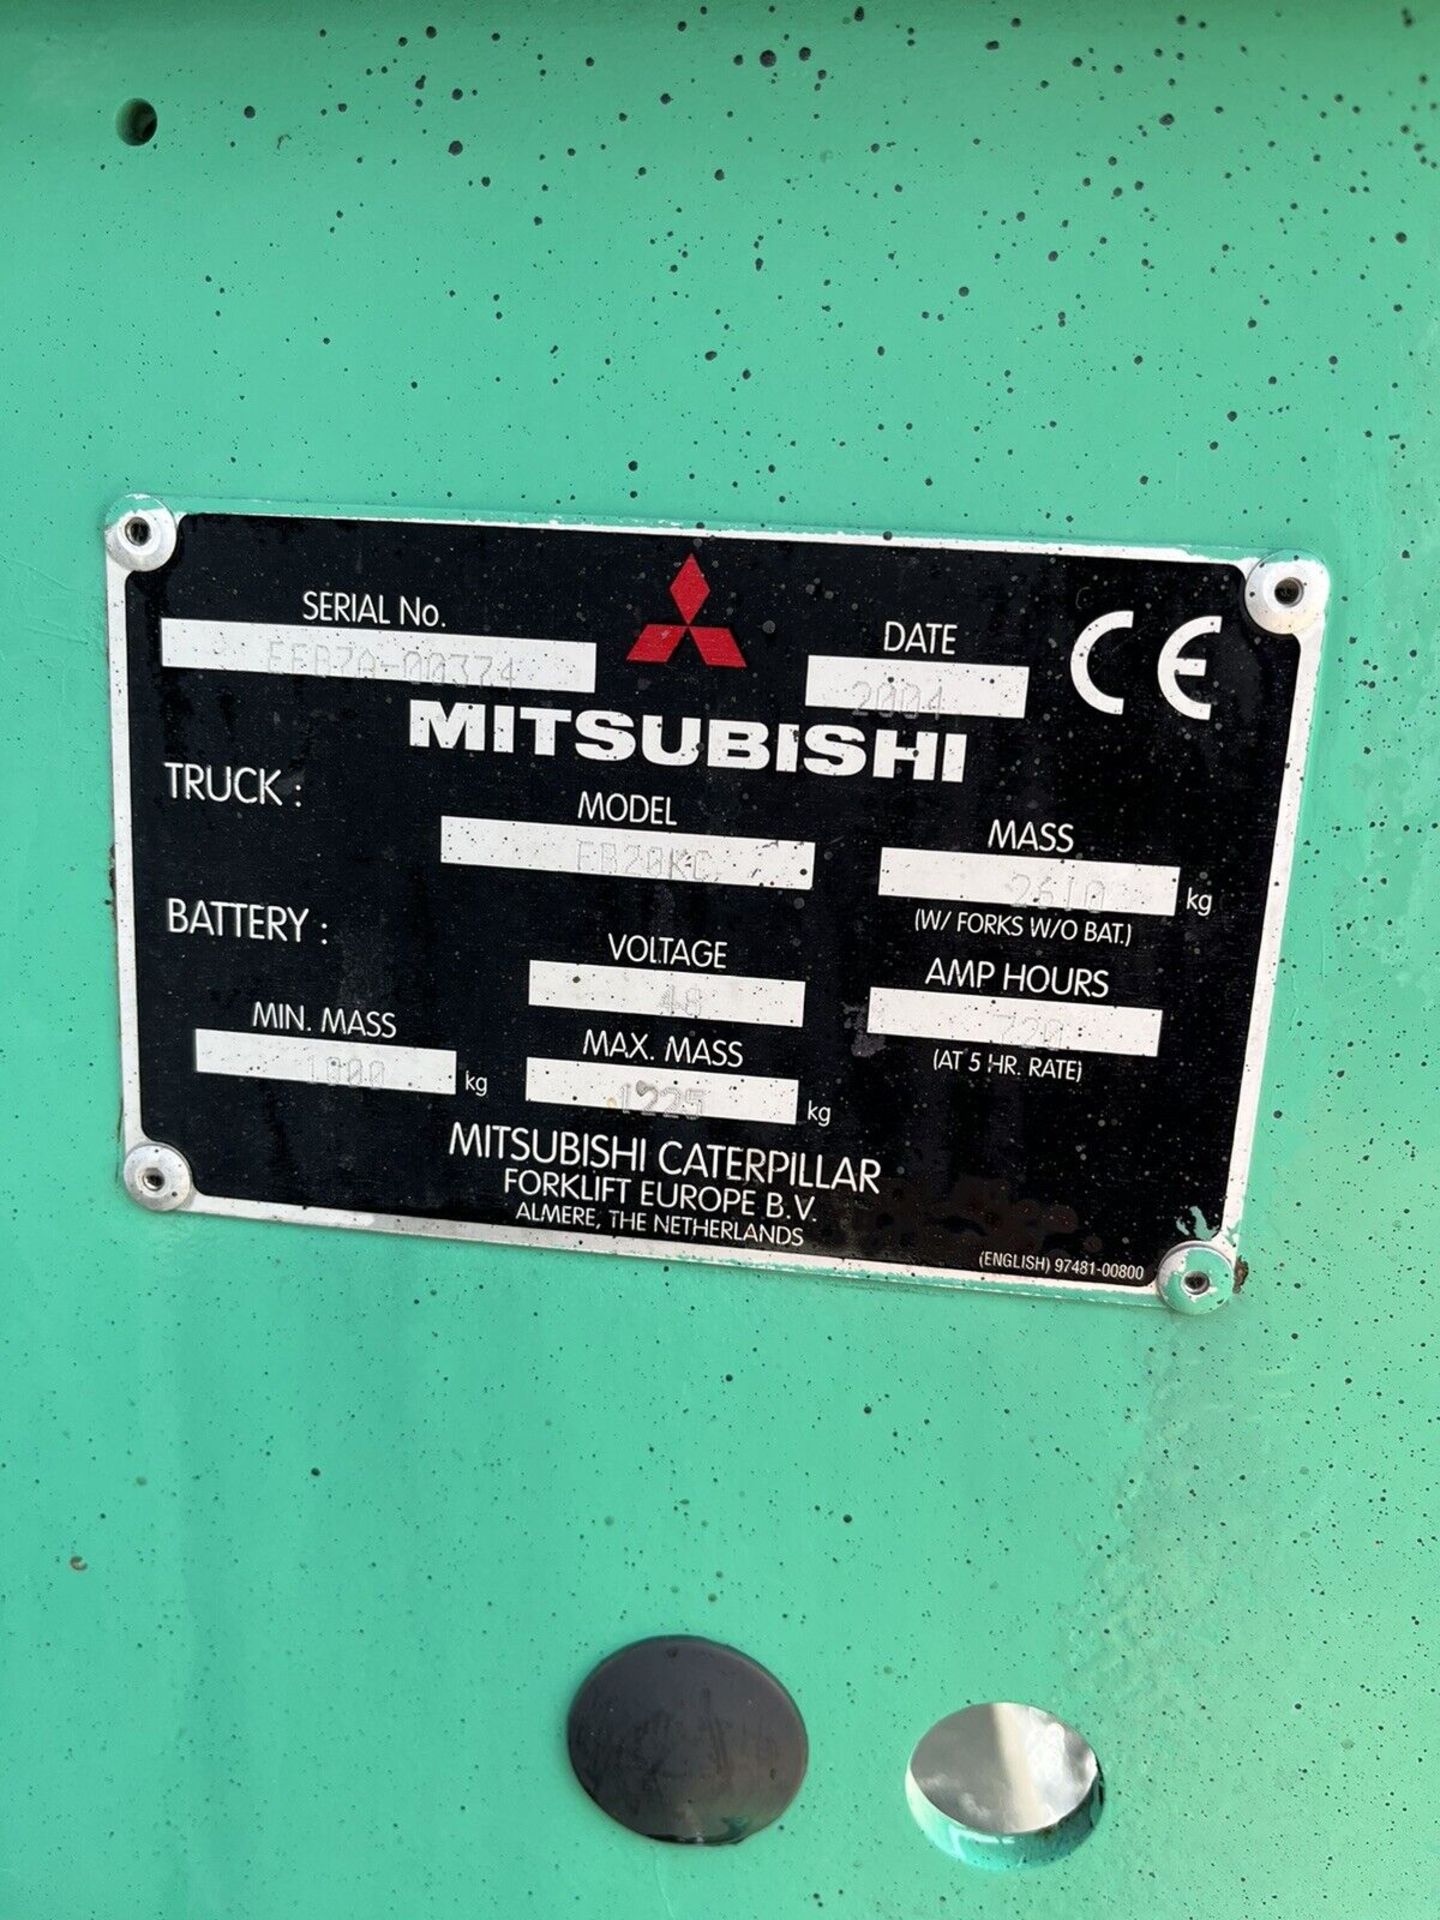 Mitsubishi 2 Tonne Electric forklift truck Container Spec - Image 5 of 6